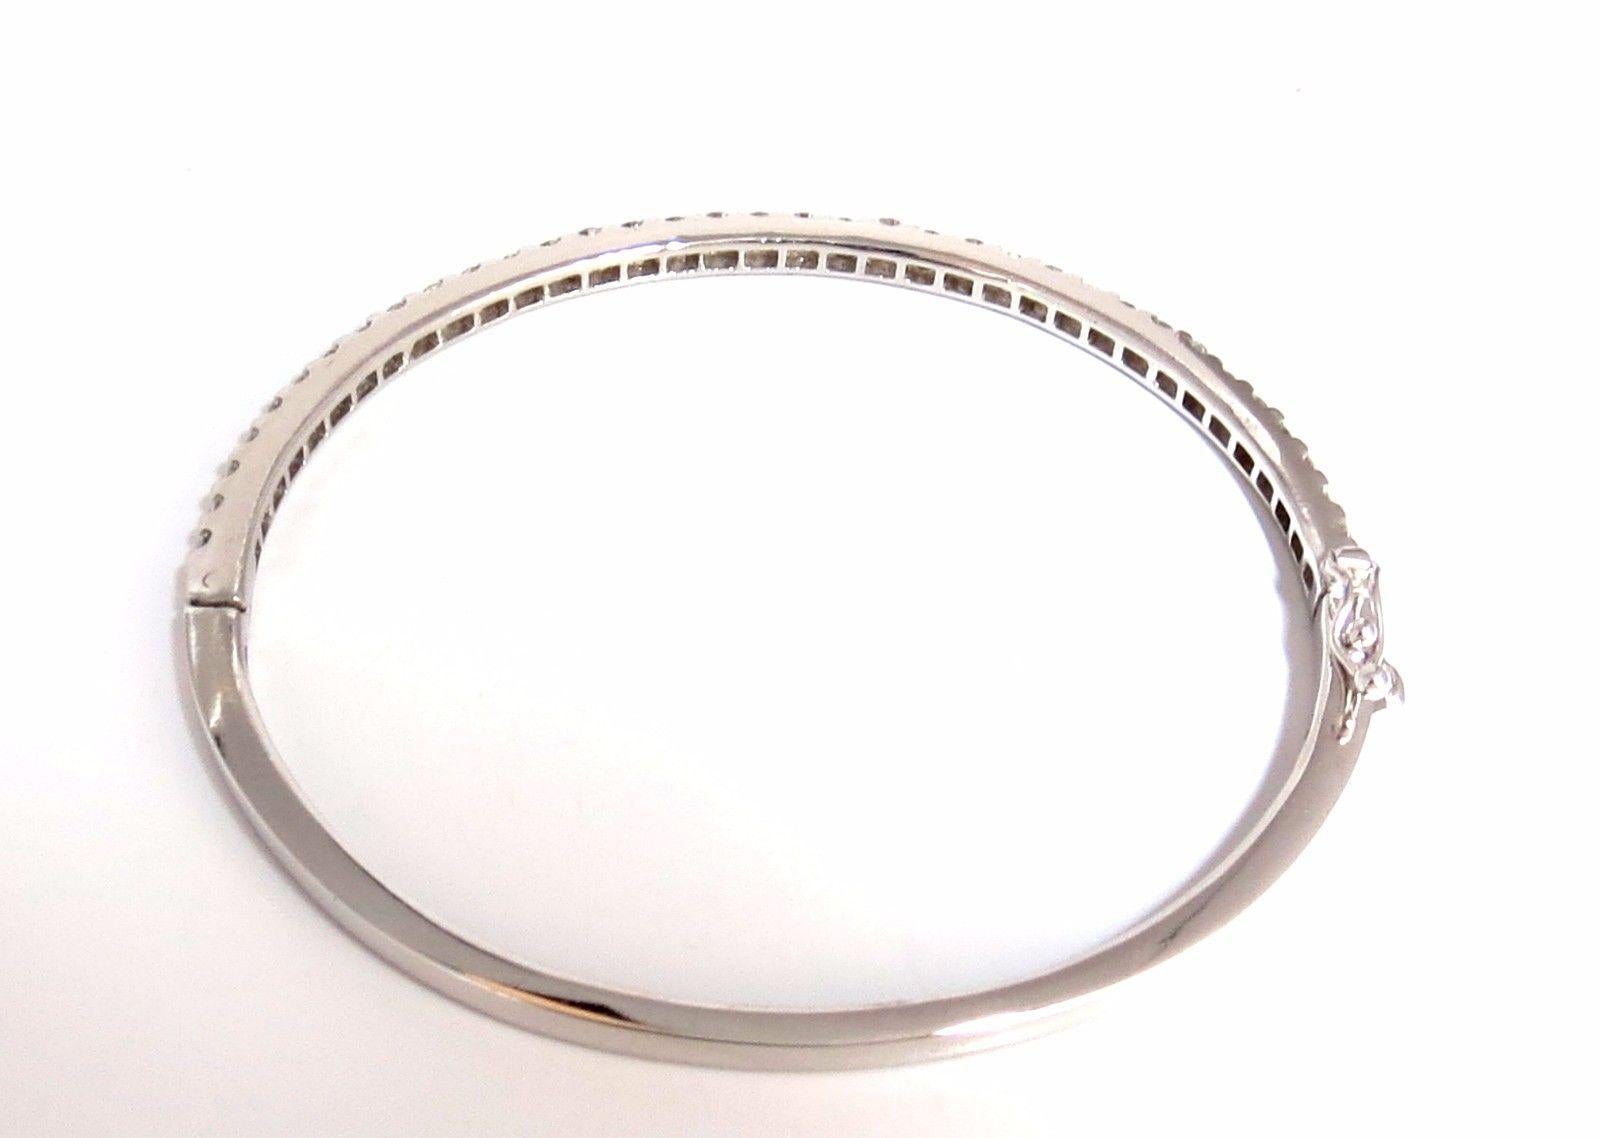 2.28ct natural diamonds bangle bracelet

beautiful sharing / common prong

Rounds & Full cut.

G-color & Vs-2 clarity.

14kt. white gold 

12 Grams.

3mm wide

7 inch (wearable length)

Secure Lock, safety catch and snap (button mechanism)

$9,000